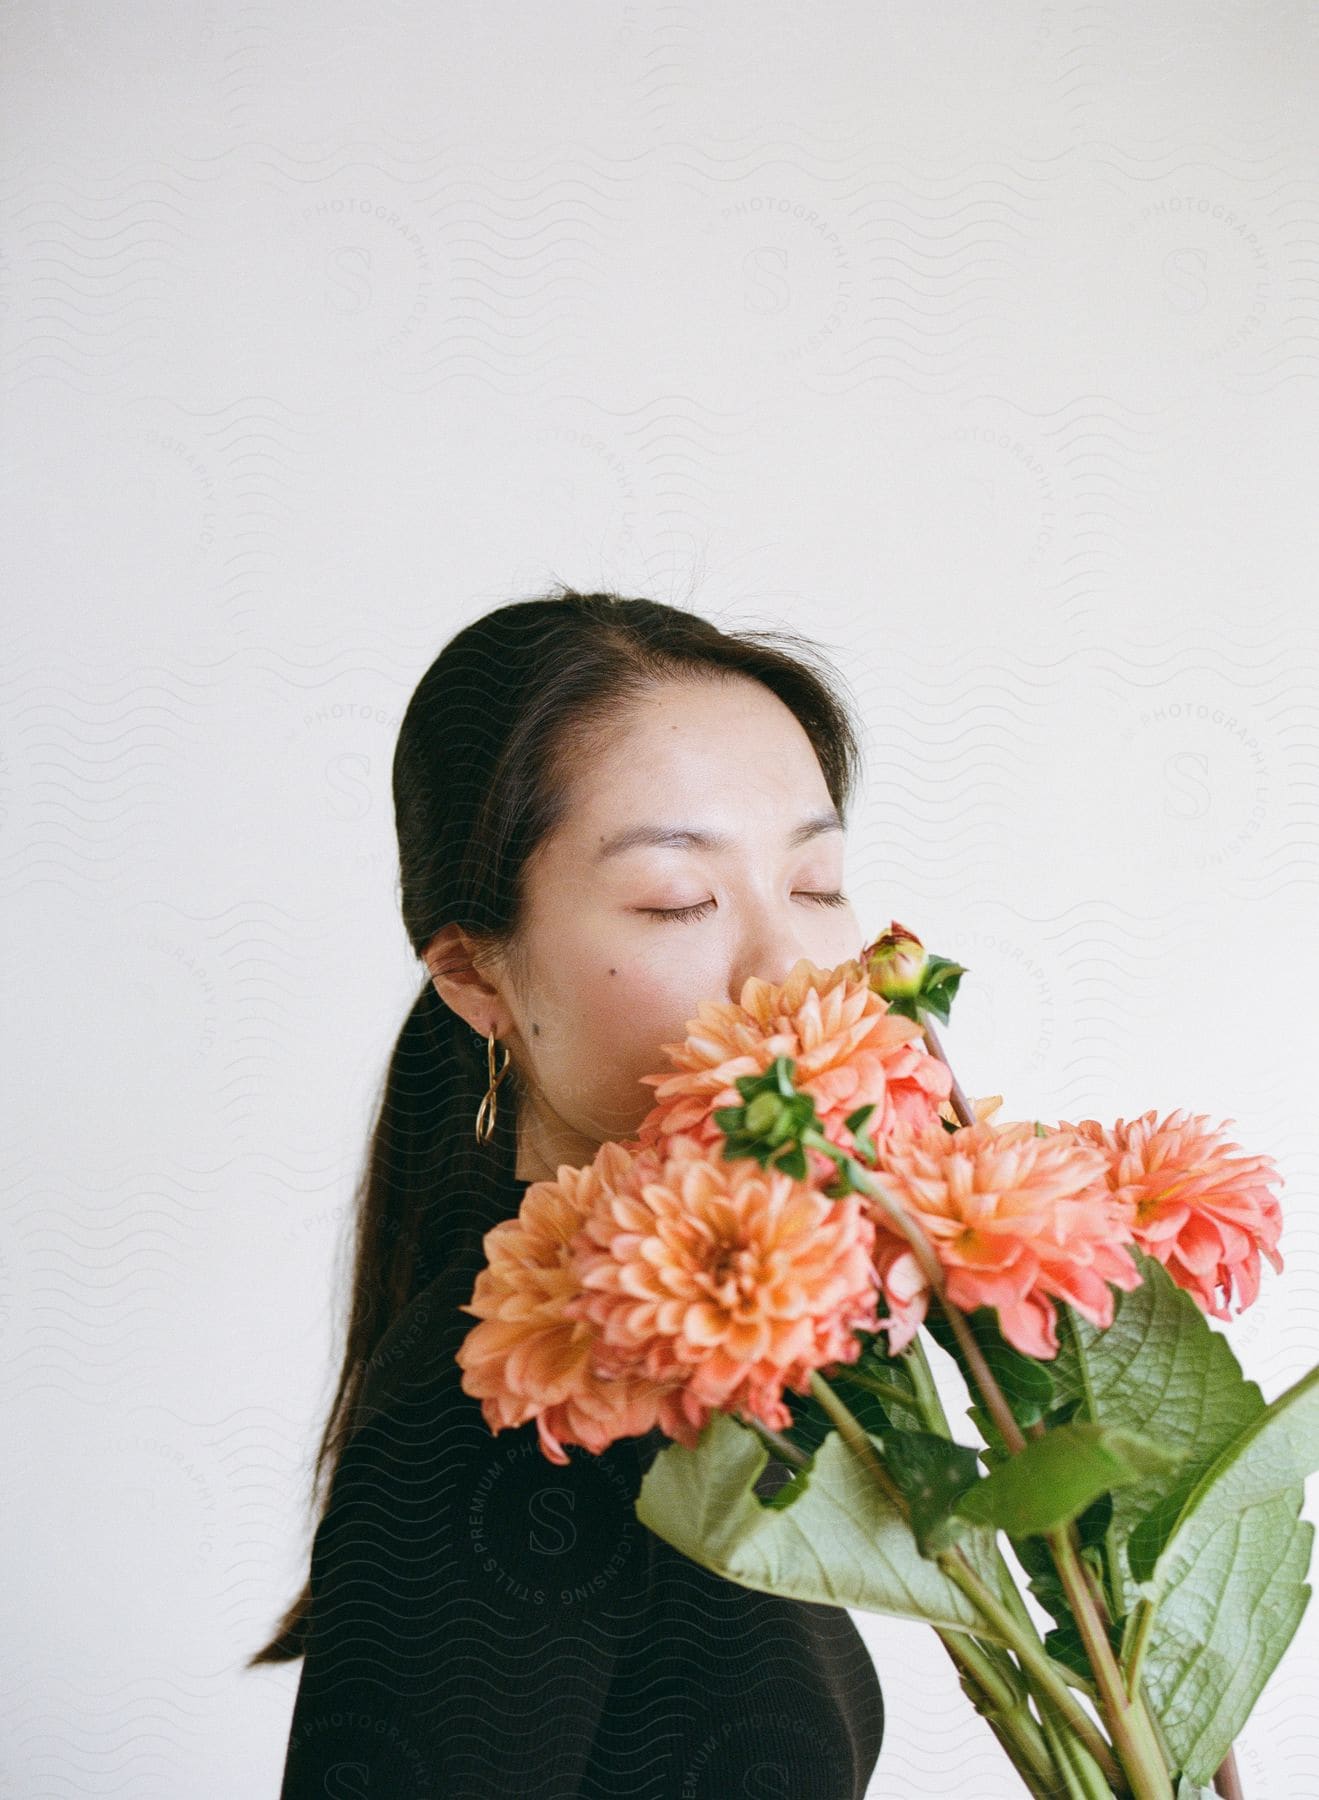 A woman has her eyes closed and is smelling a bouquet of orange flowers